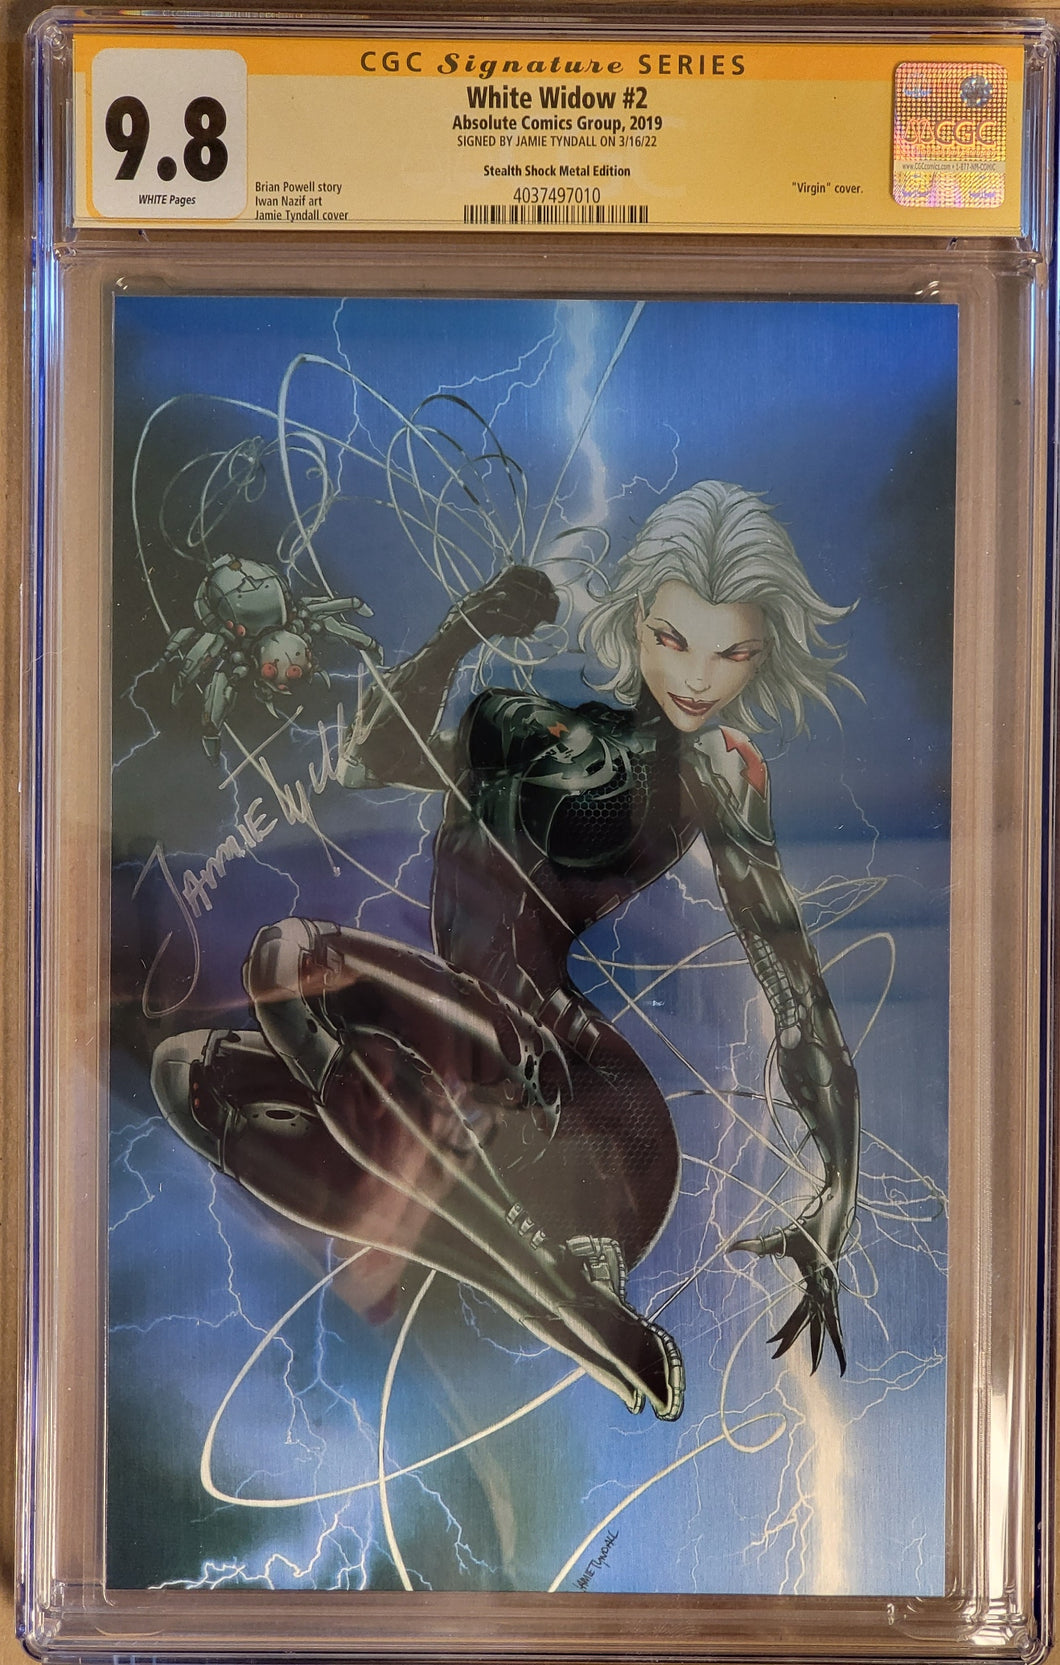 9.8 CGC Signed - White Widow #2 - Stealth Shock Metal